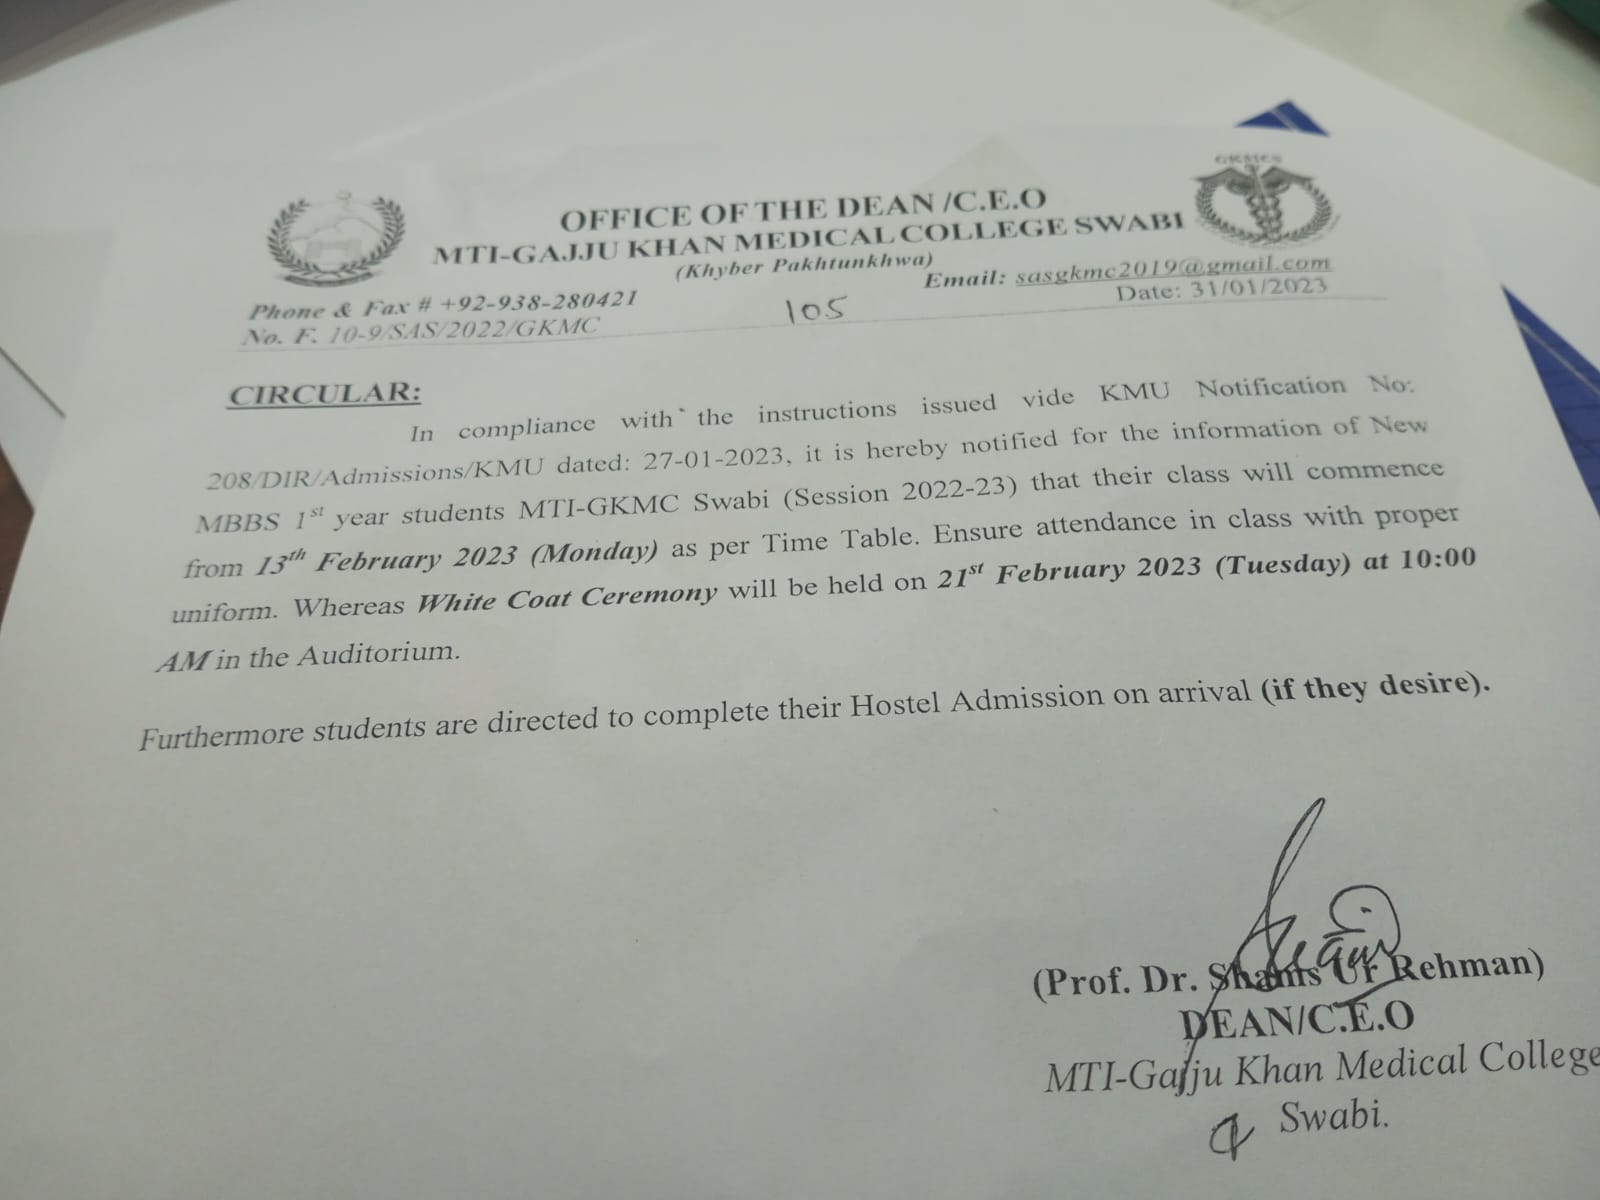 it is hereby notified for the information of New MBBS 1st year students MTI-GKMC Swabi (Session 2022-23) that their class will commence from 13th February 2023 (Monday) as per Time Table.